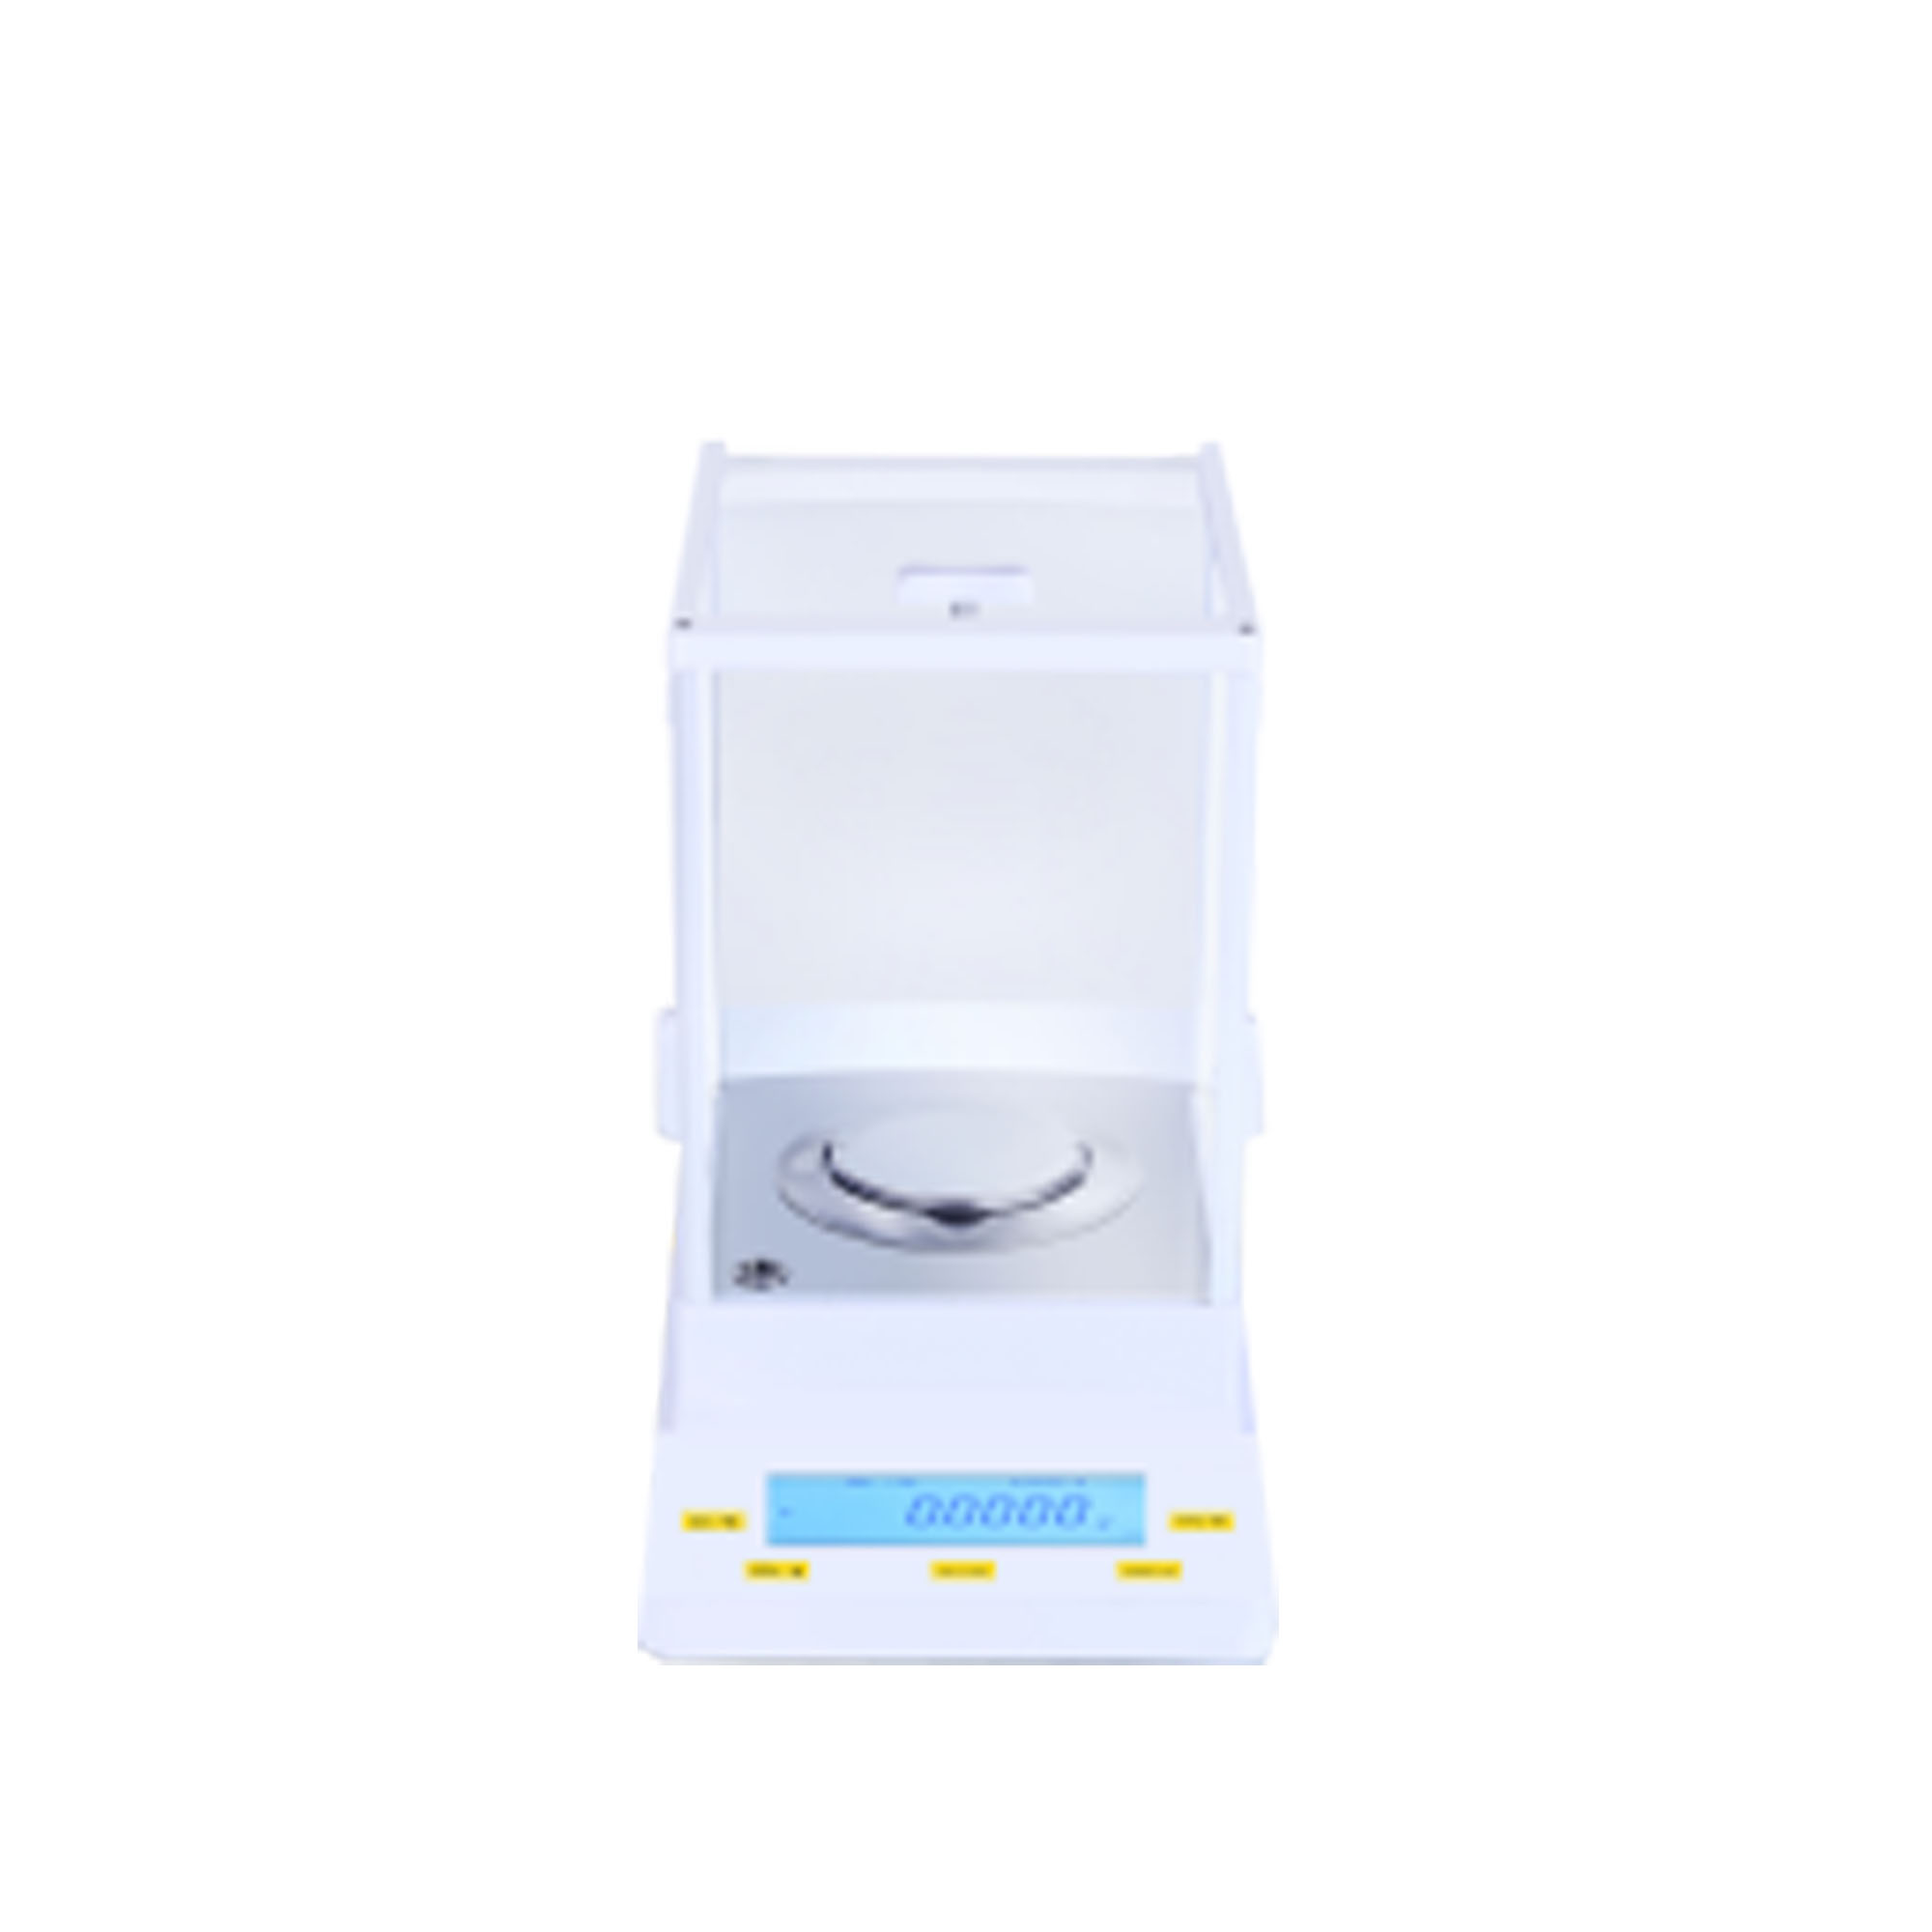 Nade Auto Internal Calibration Electronic Analytical Balance & Precision Digital weighing scale FB323 320g 1mg